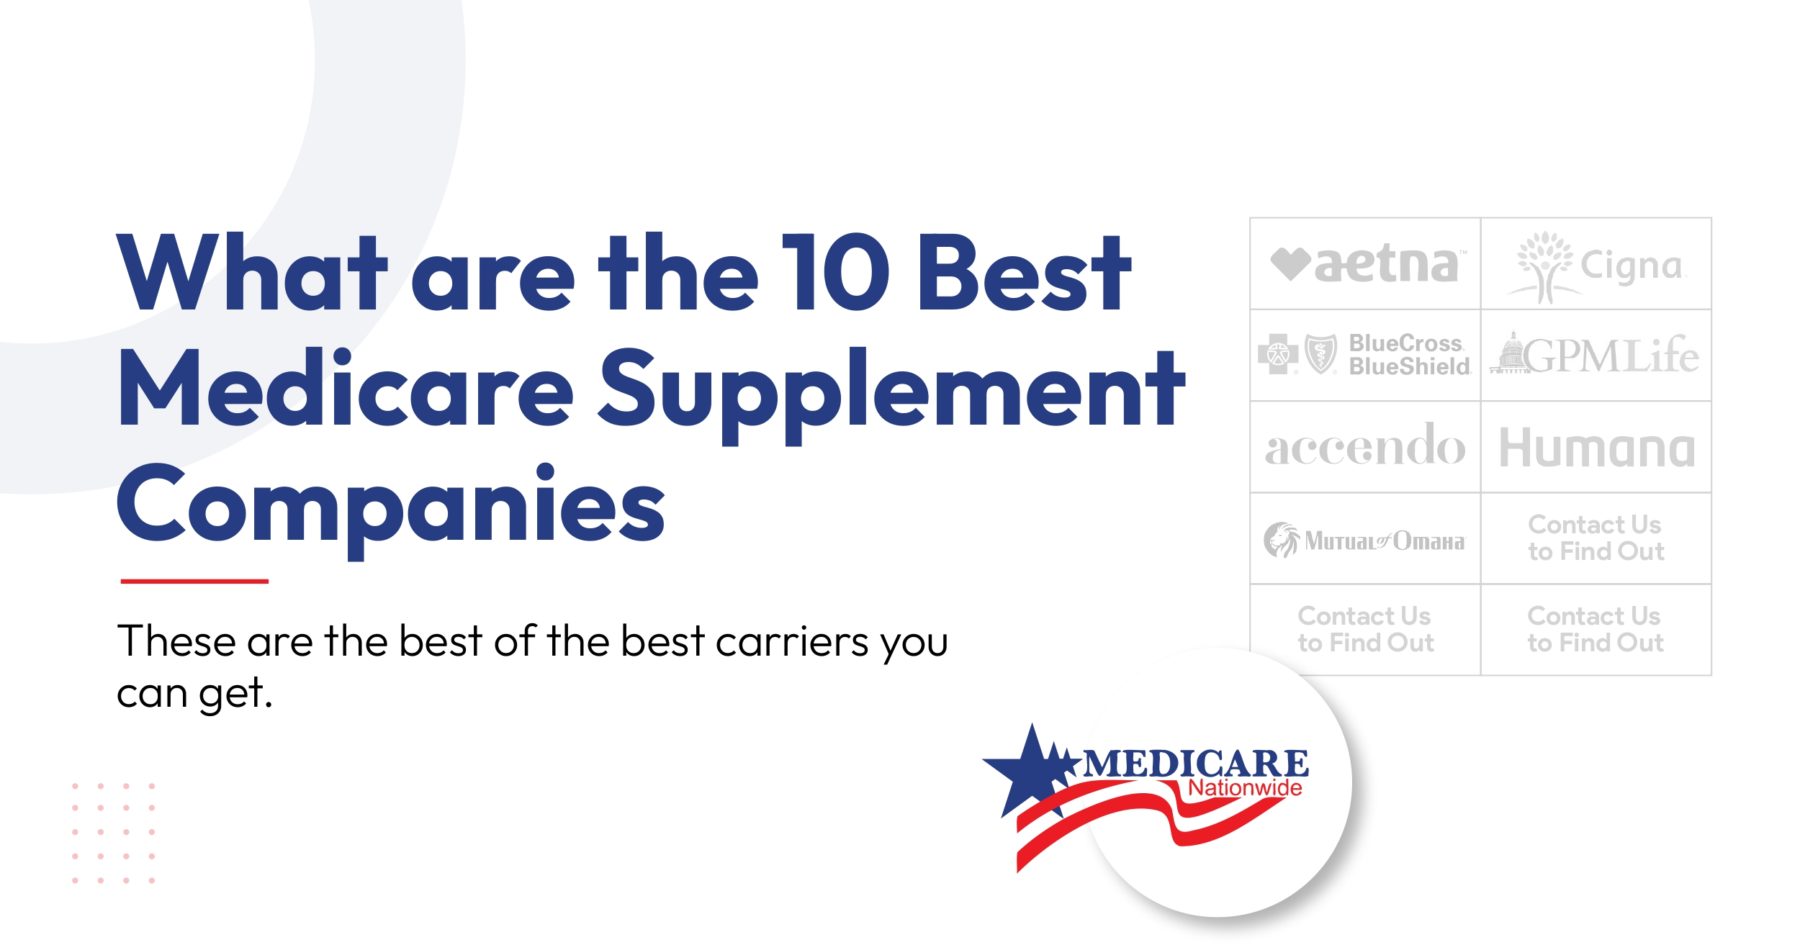 What are the 10 Best Medicare Supplement Companies